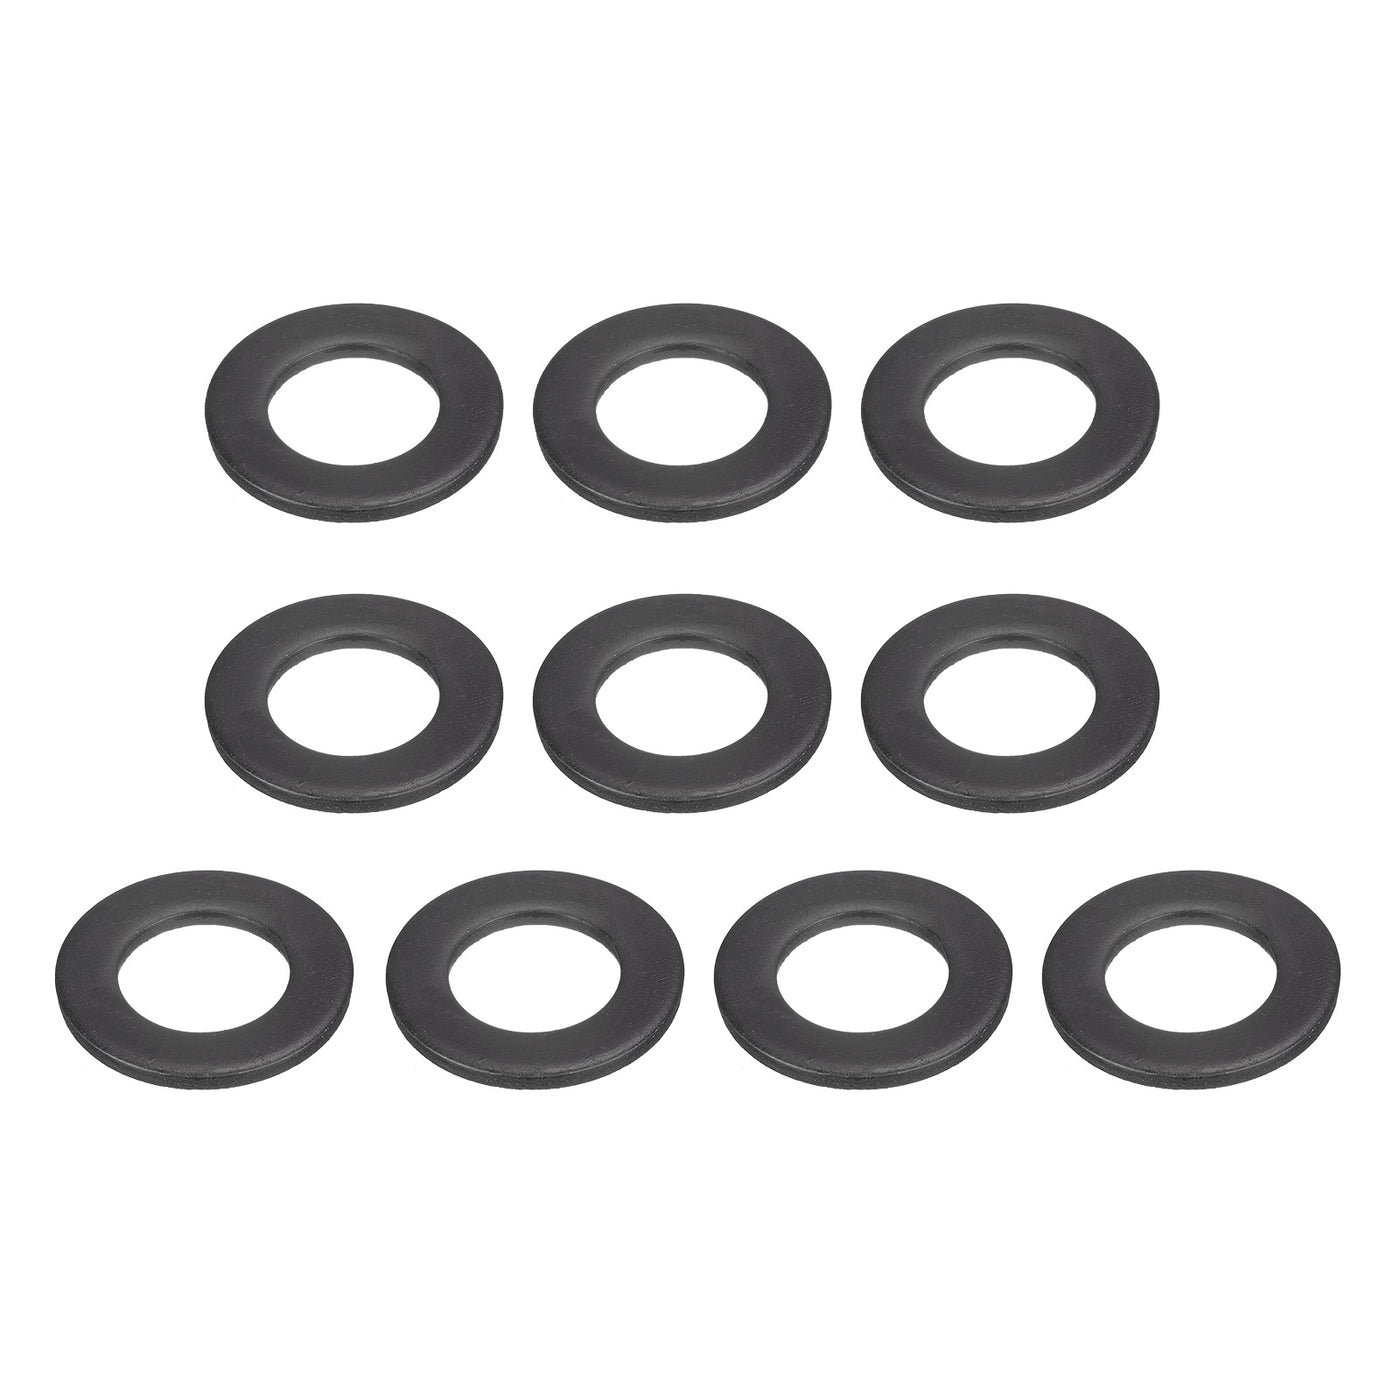 uxcell Uxcell M18 Carbon Steel Flat Washer 10pcs 19x33.7x2.8mm Grade 8.8 Alloy Steel Fasteners